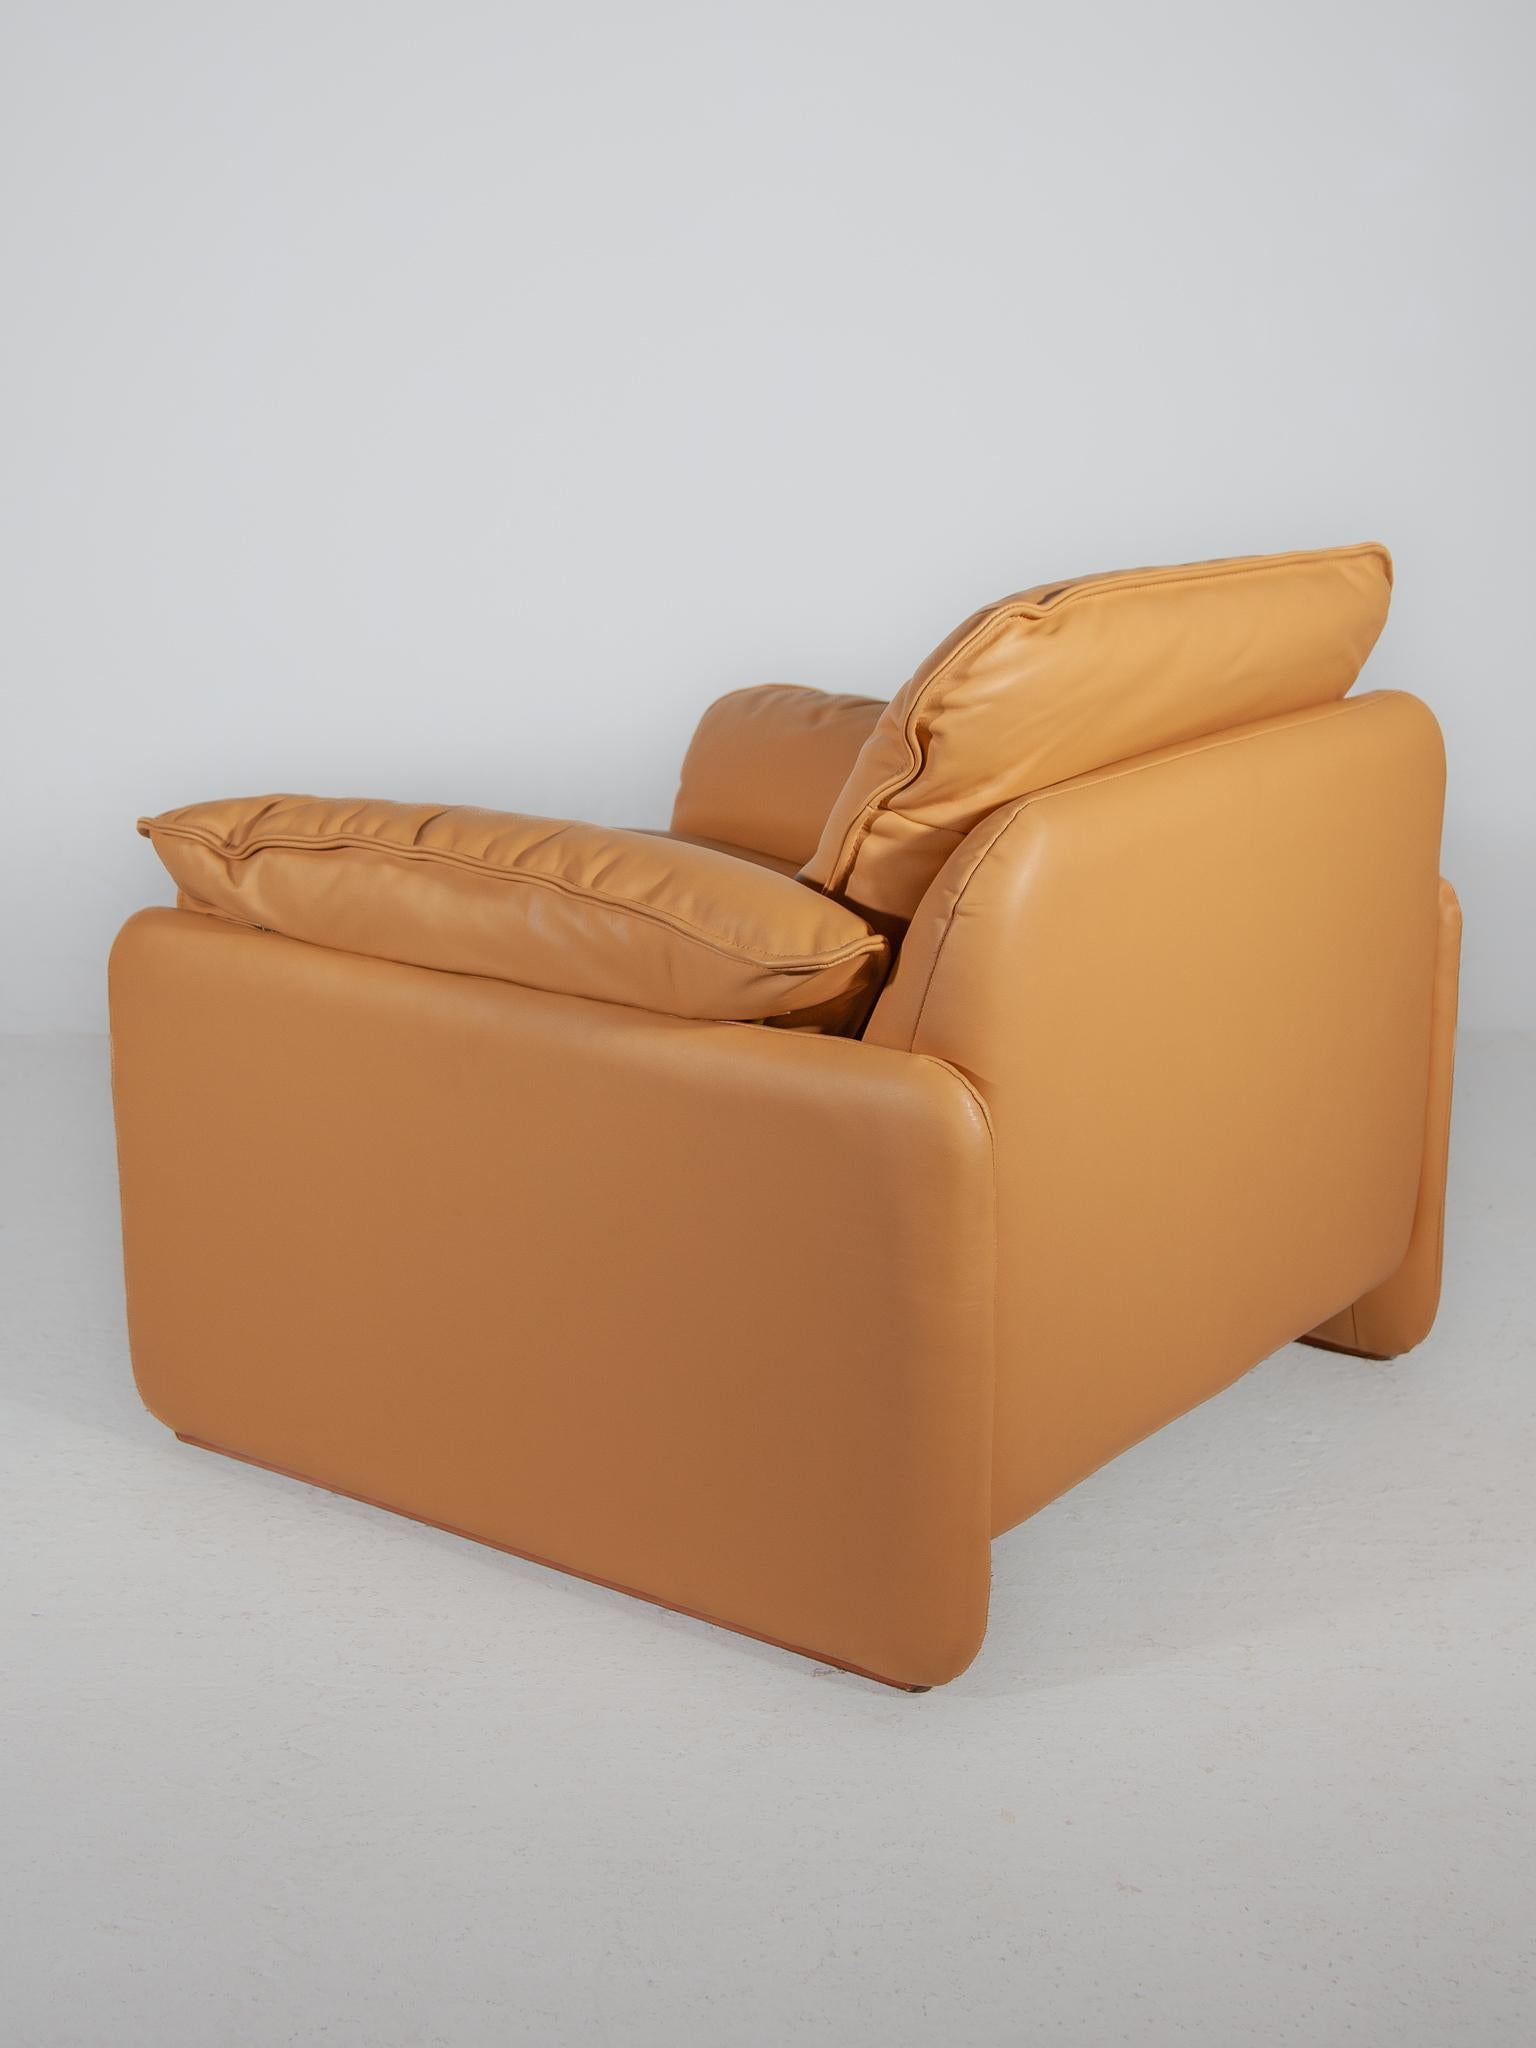 Set of 2 Ds-61 Armchairs Camel Leather designed by De Sede, 1970s For Sale 3